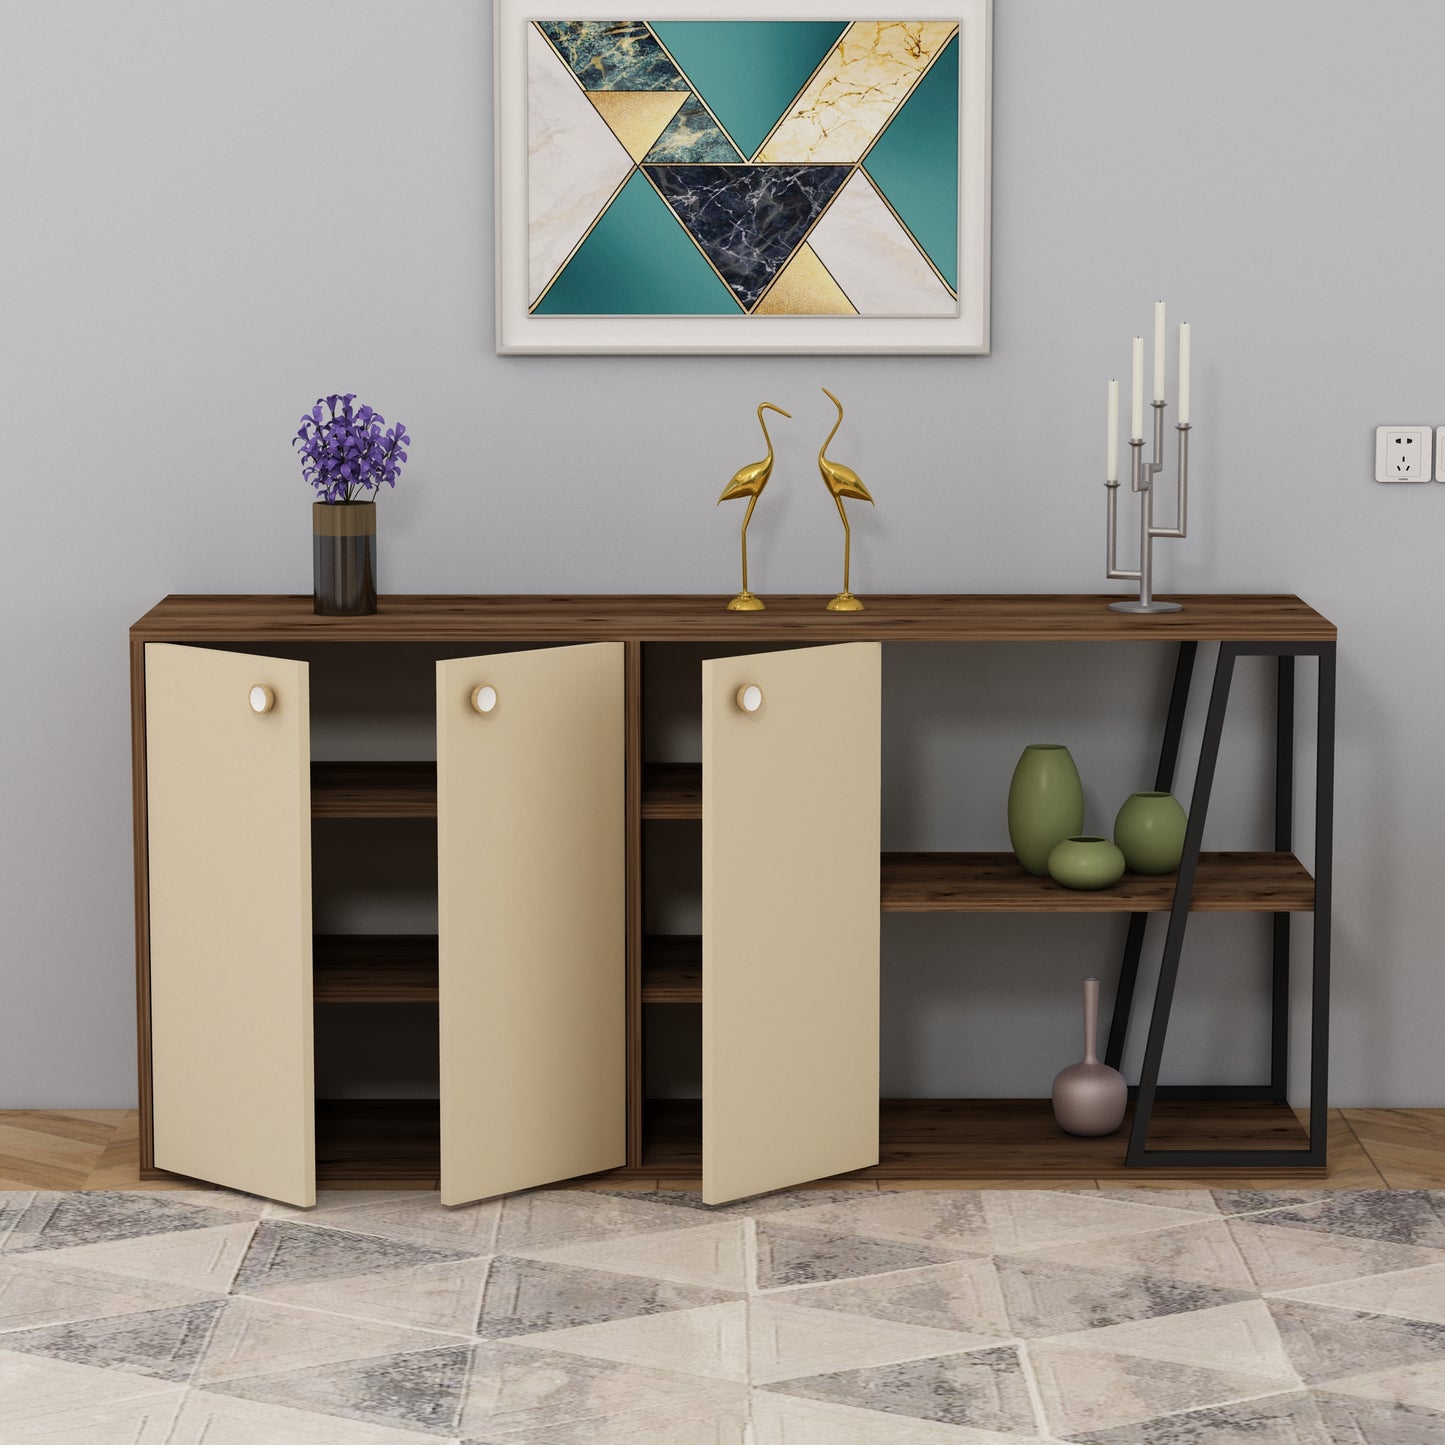 Avena Sideboard with Cabinets and Shelves